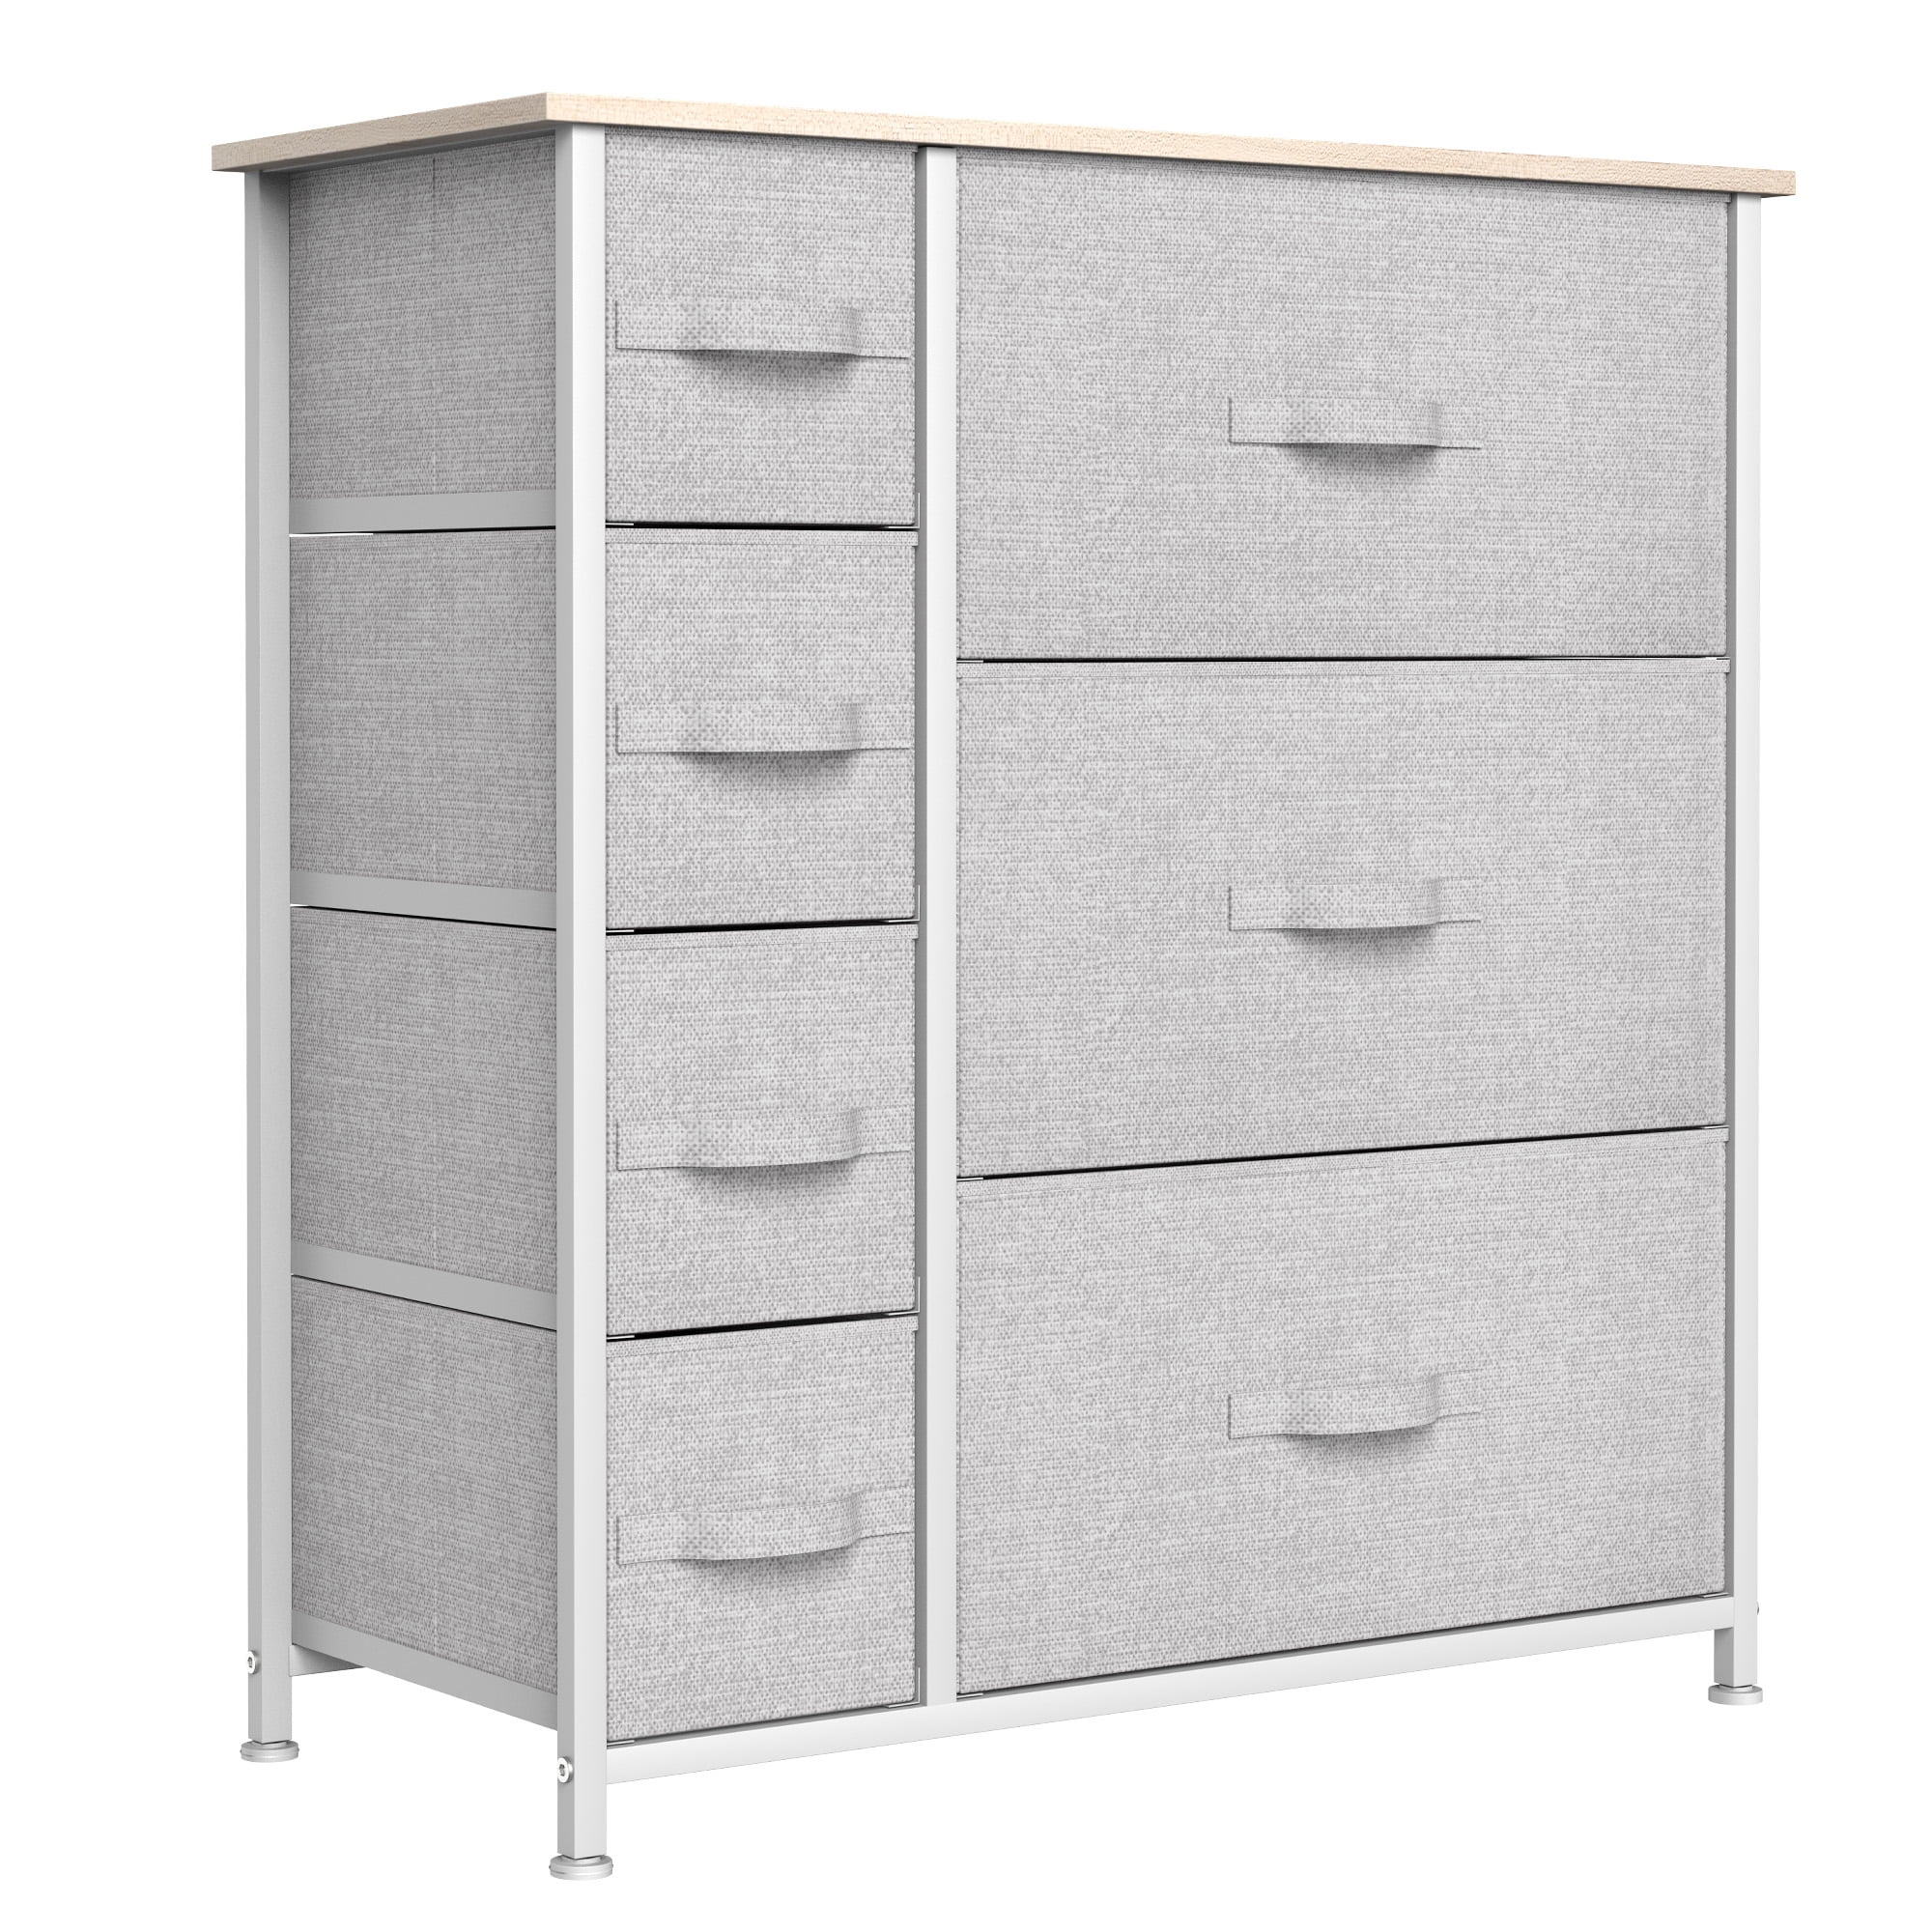 YITAHOME Dresser Bedside 7 Drawers Storage Tower Unit Furniture Bedroom Office 